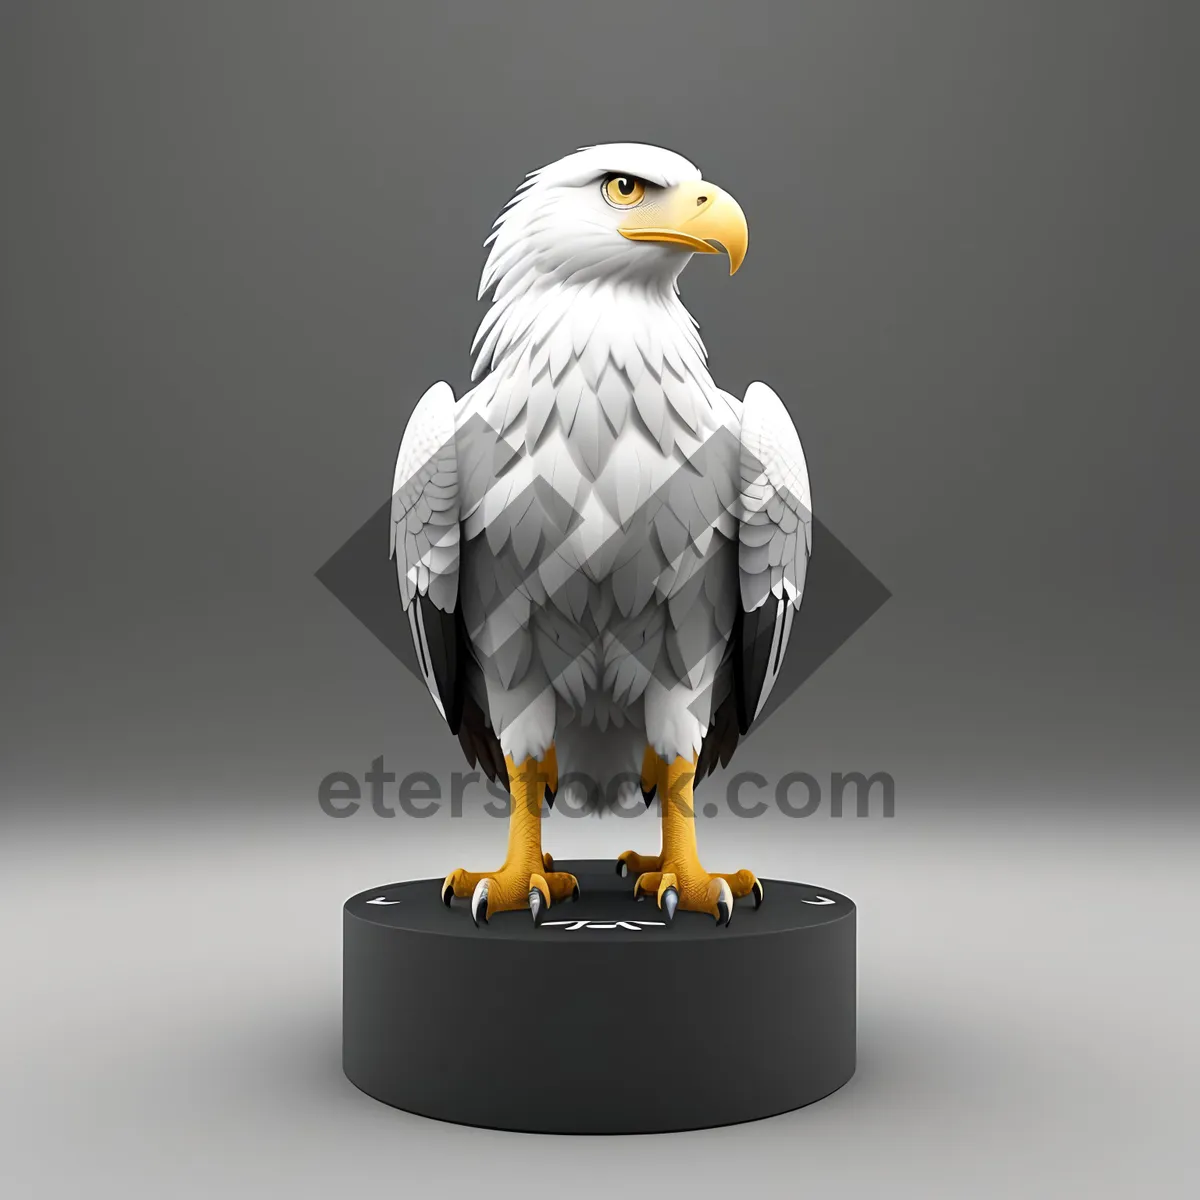 Picture of Majestic Bald Eagle in its Natural Habitat